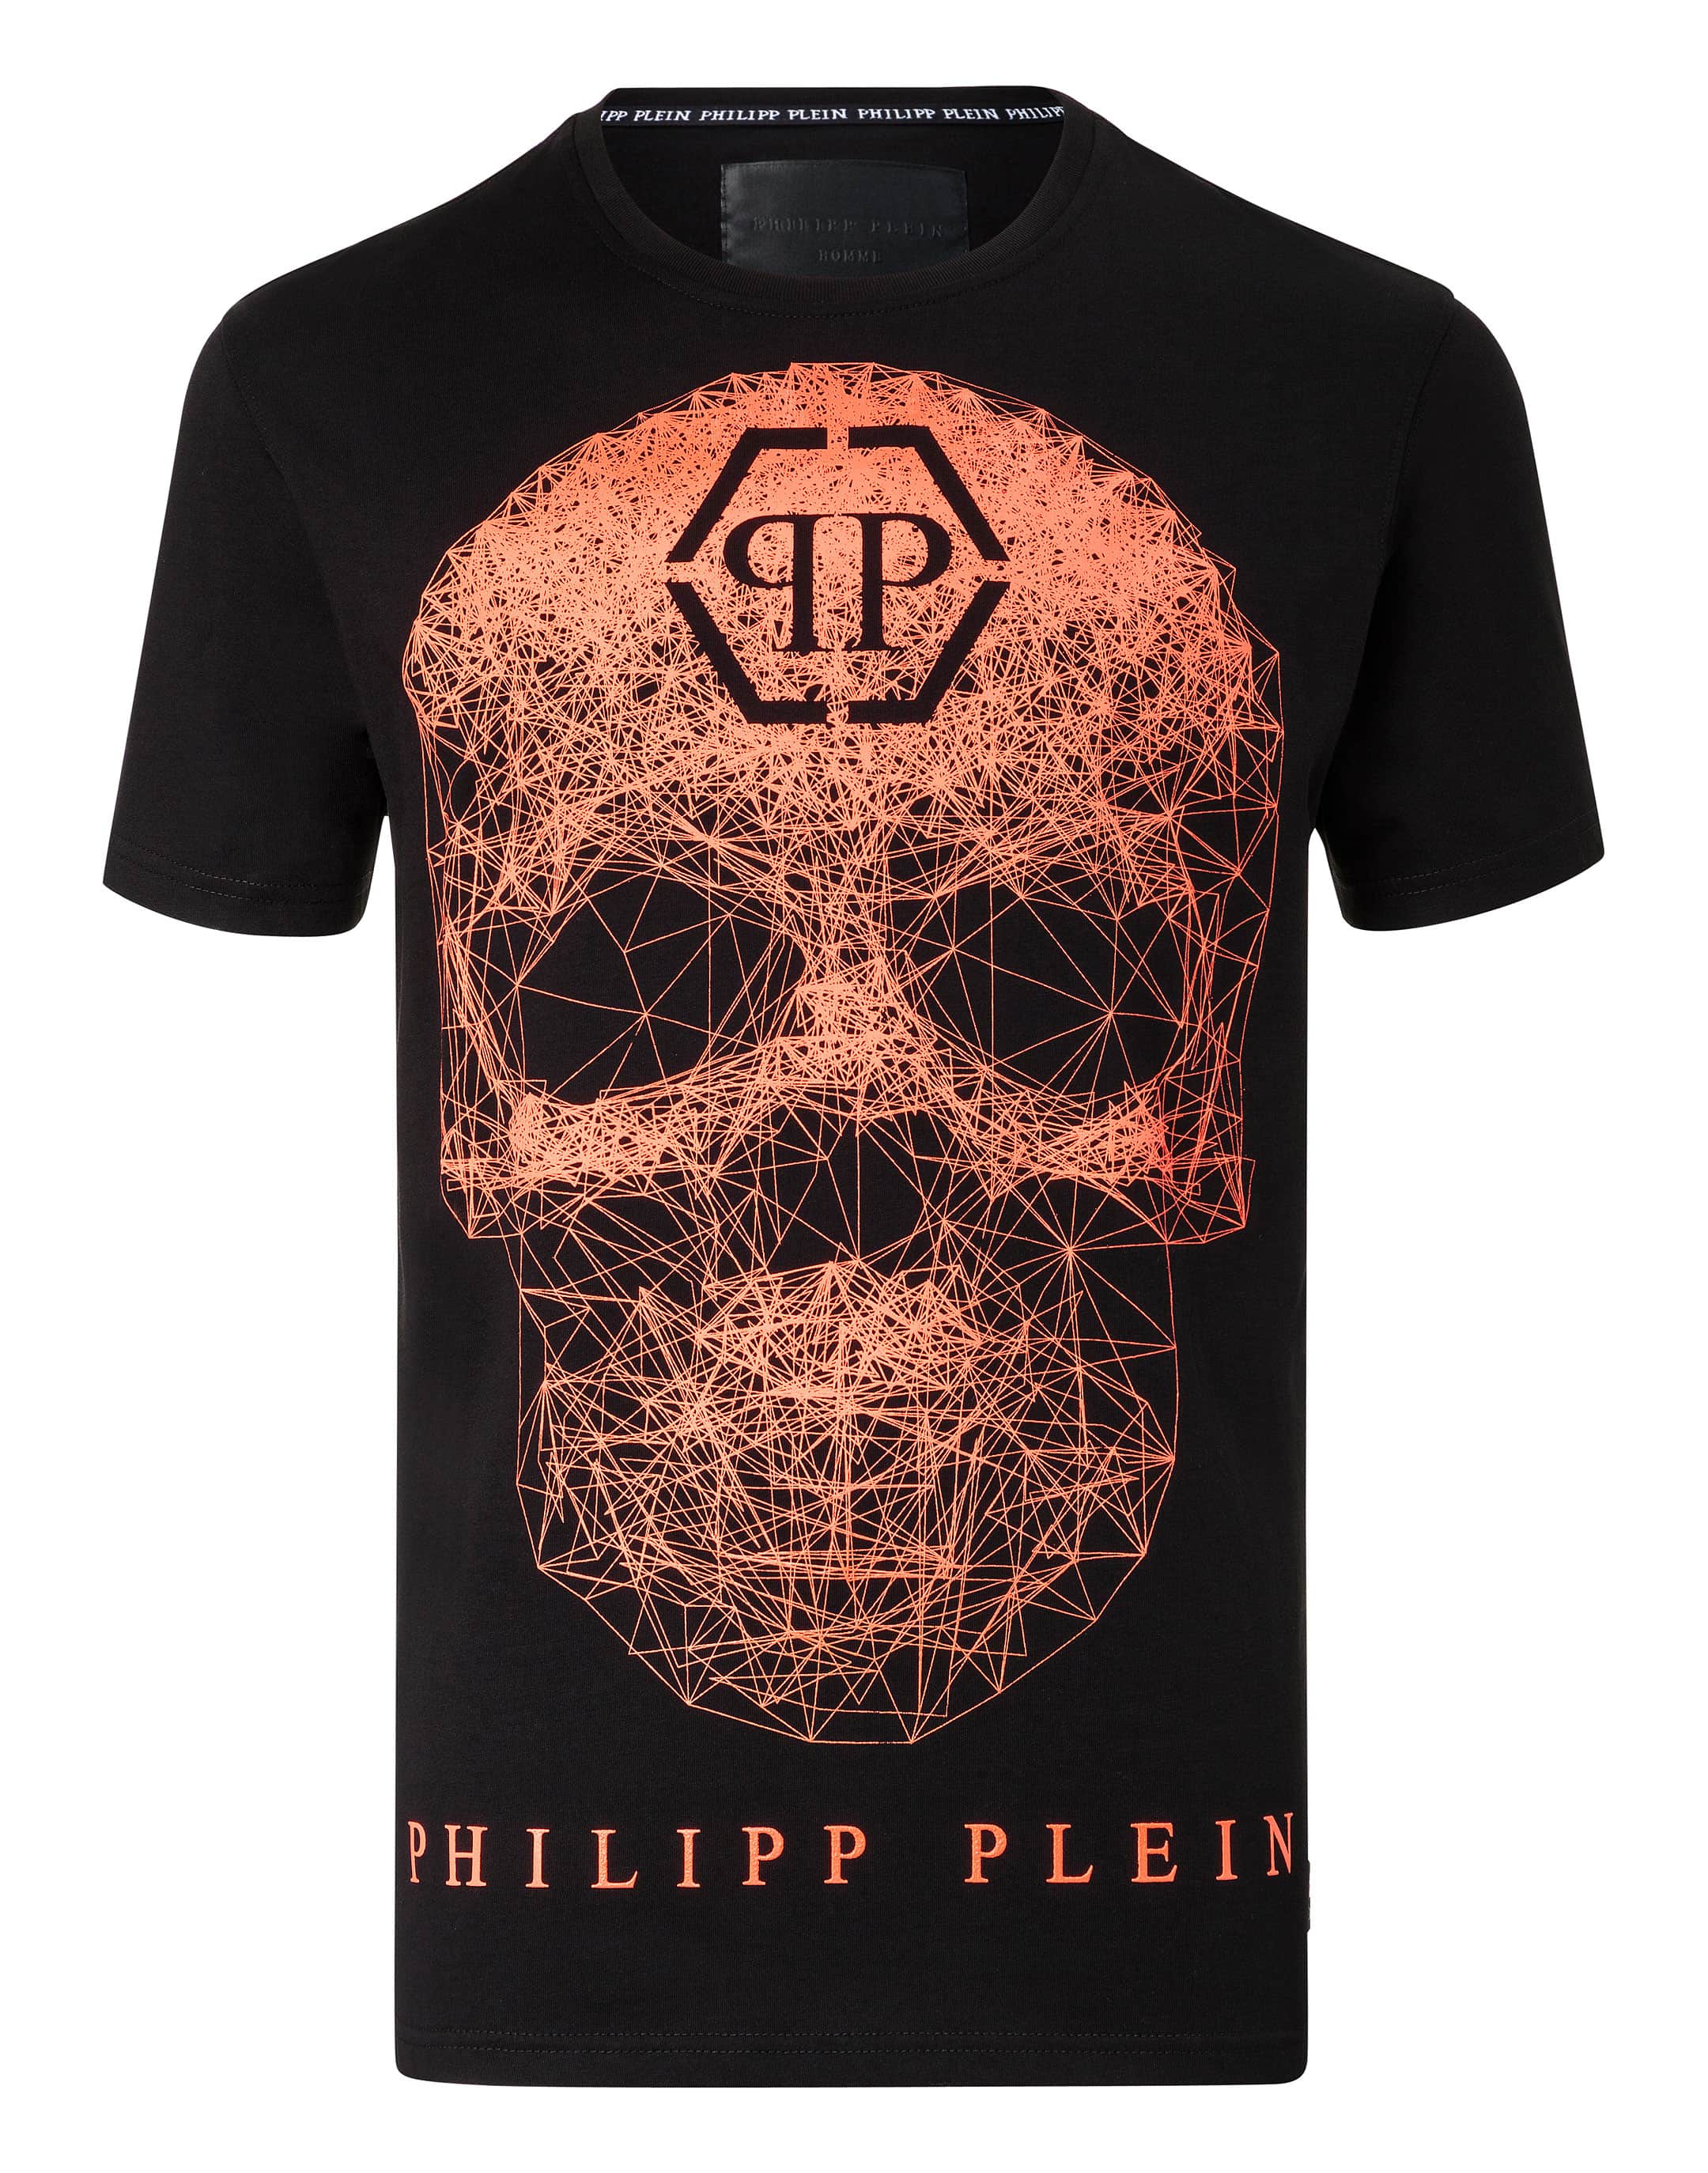 Philippe Plein T Shirt Homme Hotsell, SAVE 53% - lutheranems.com